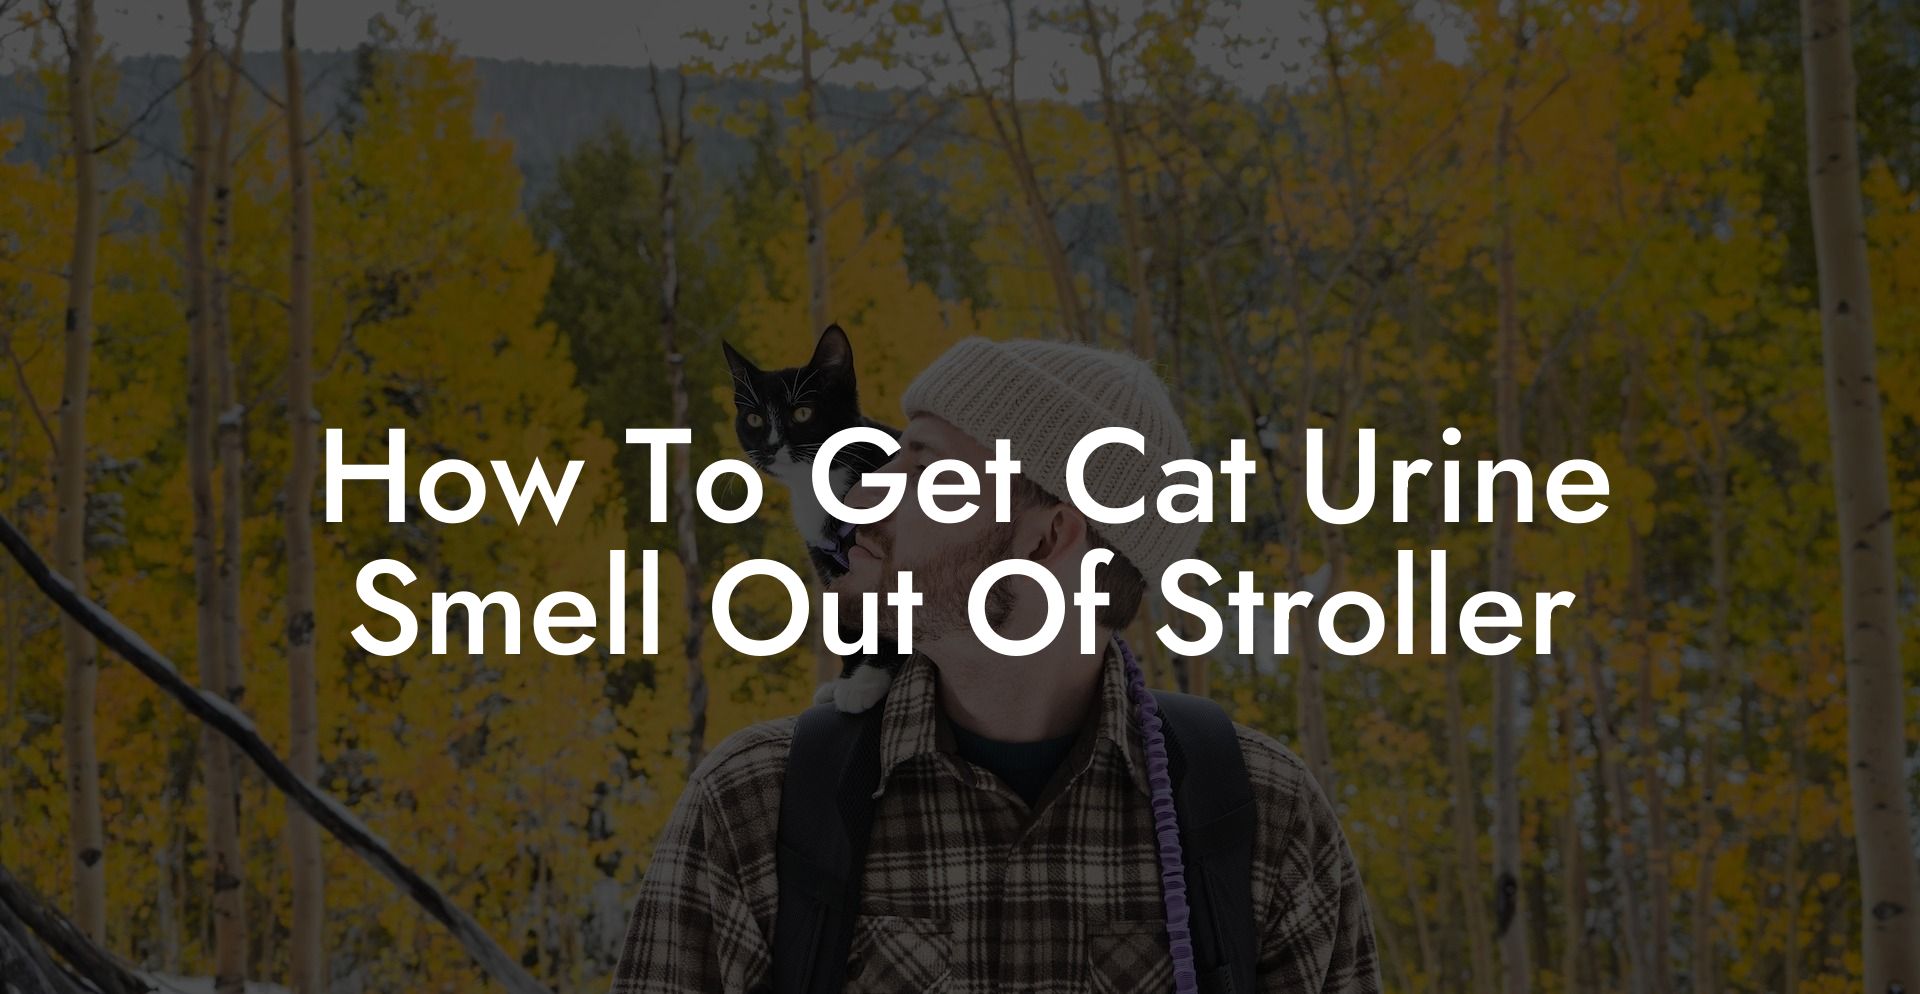 How To Get Cat Urine Smell Out Of Stroller